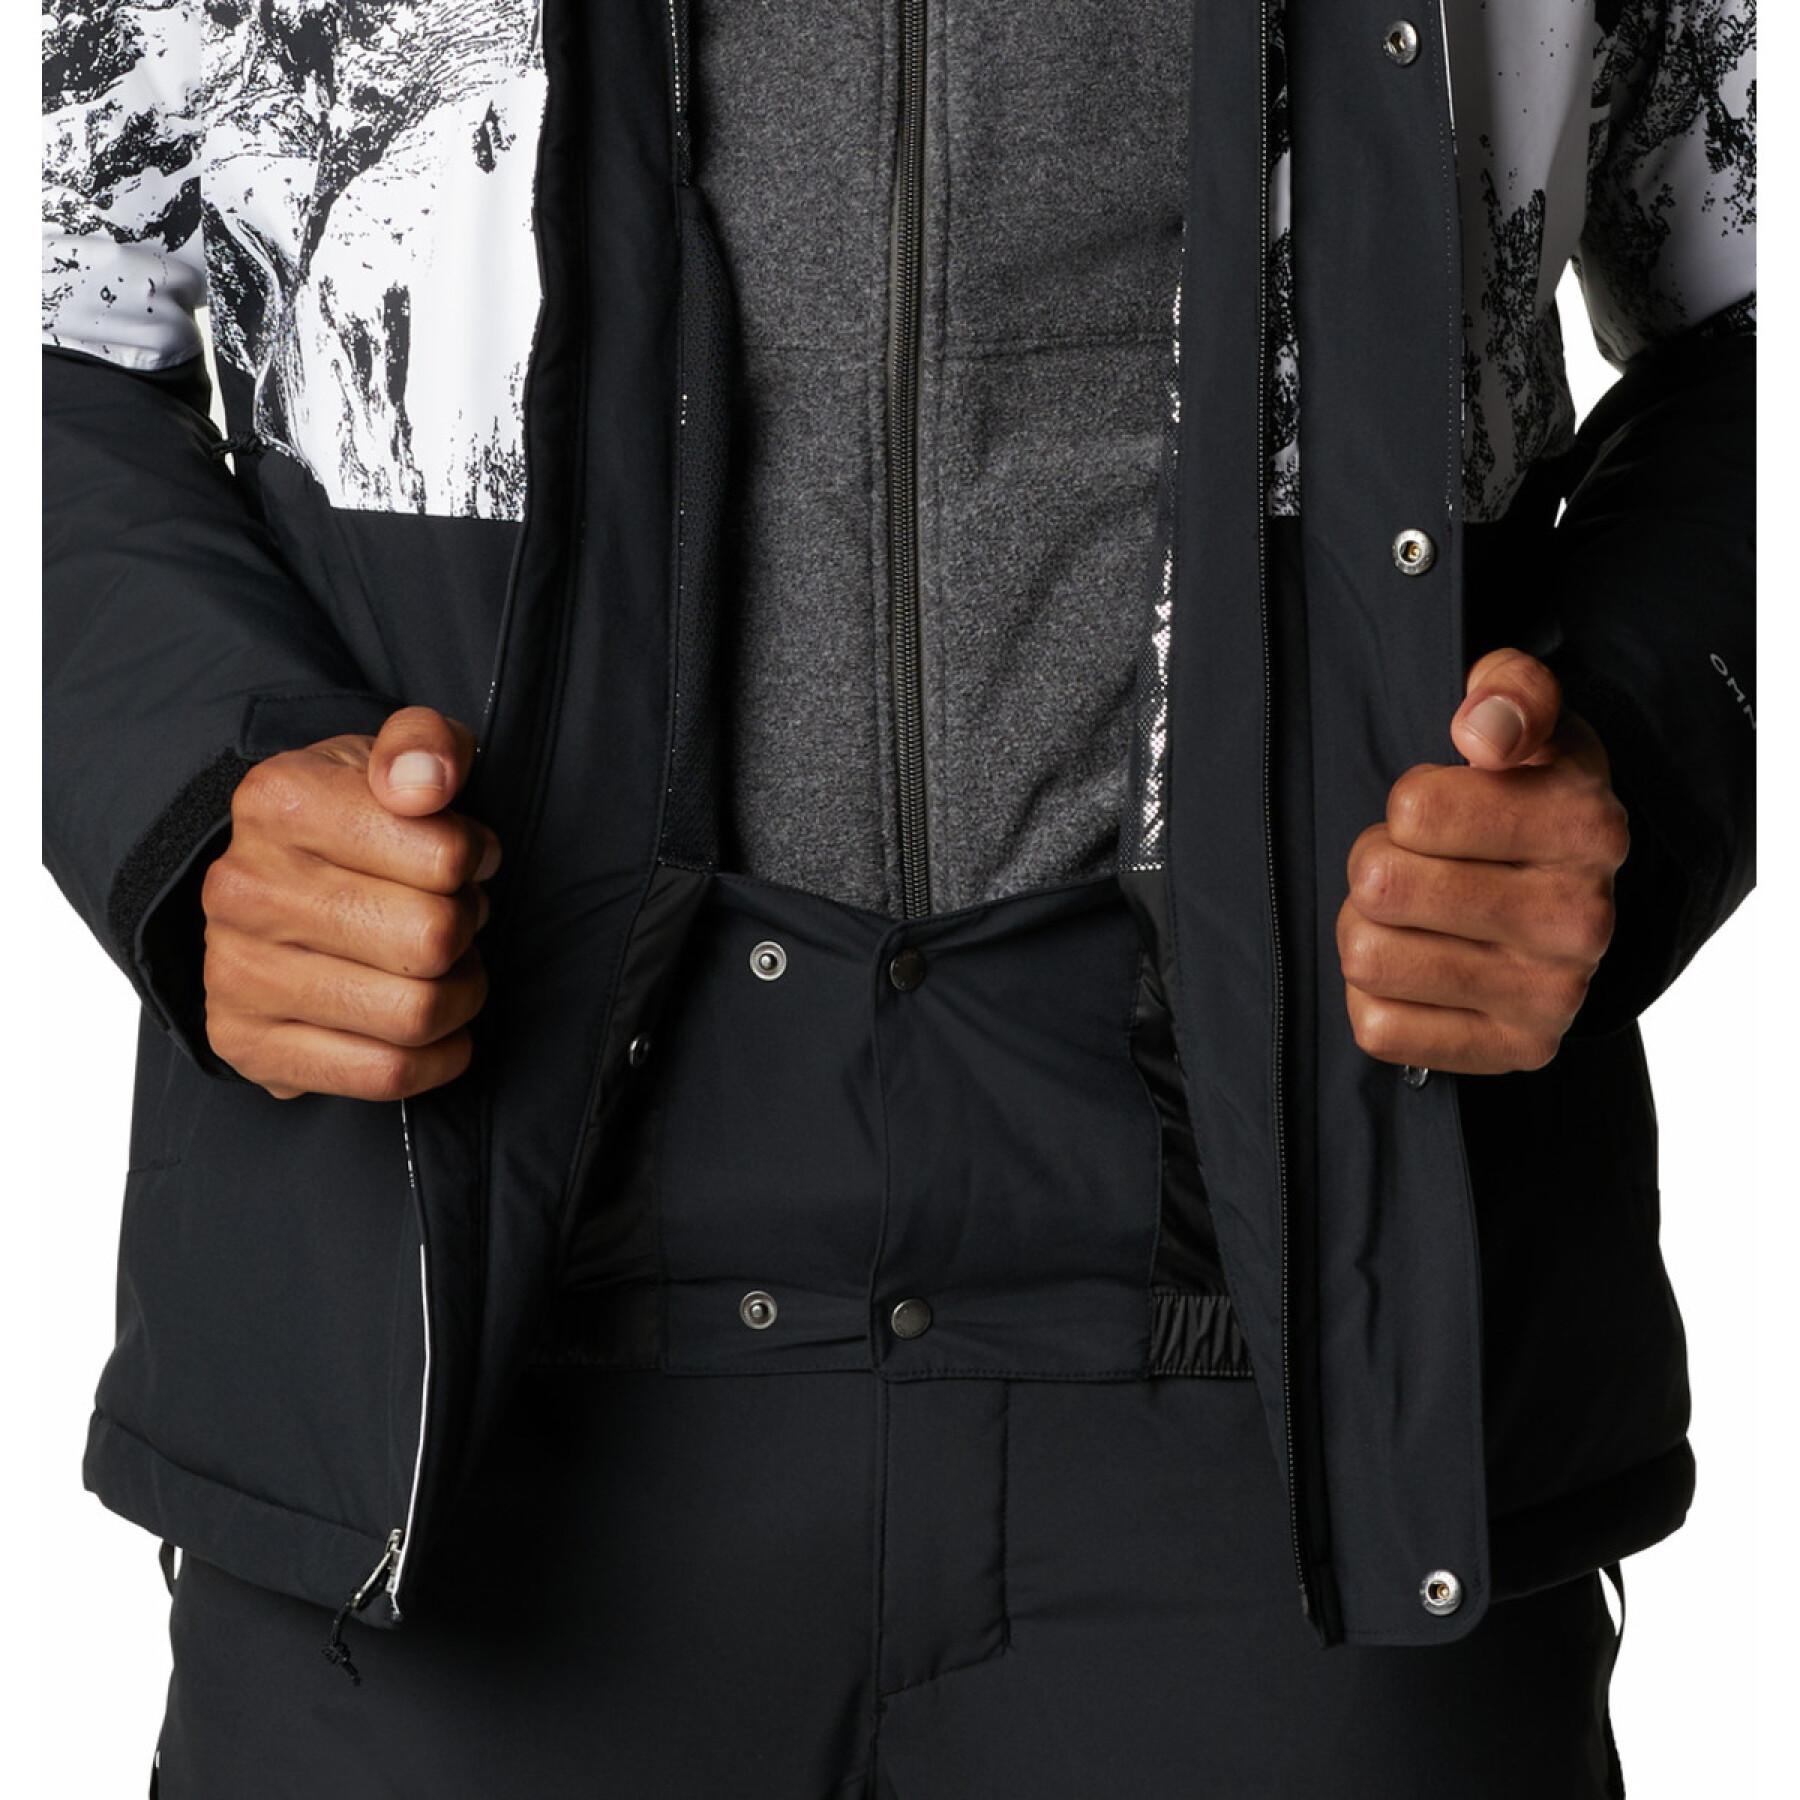 Chaqueta impermeable Columbia Winter District